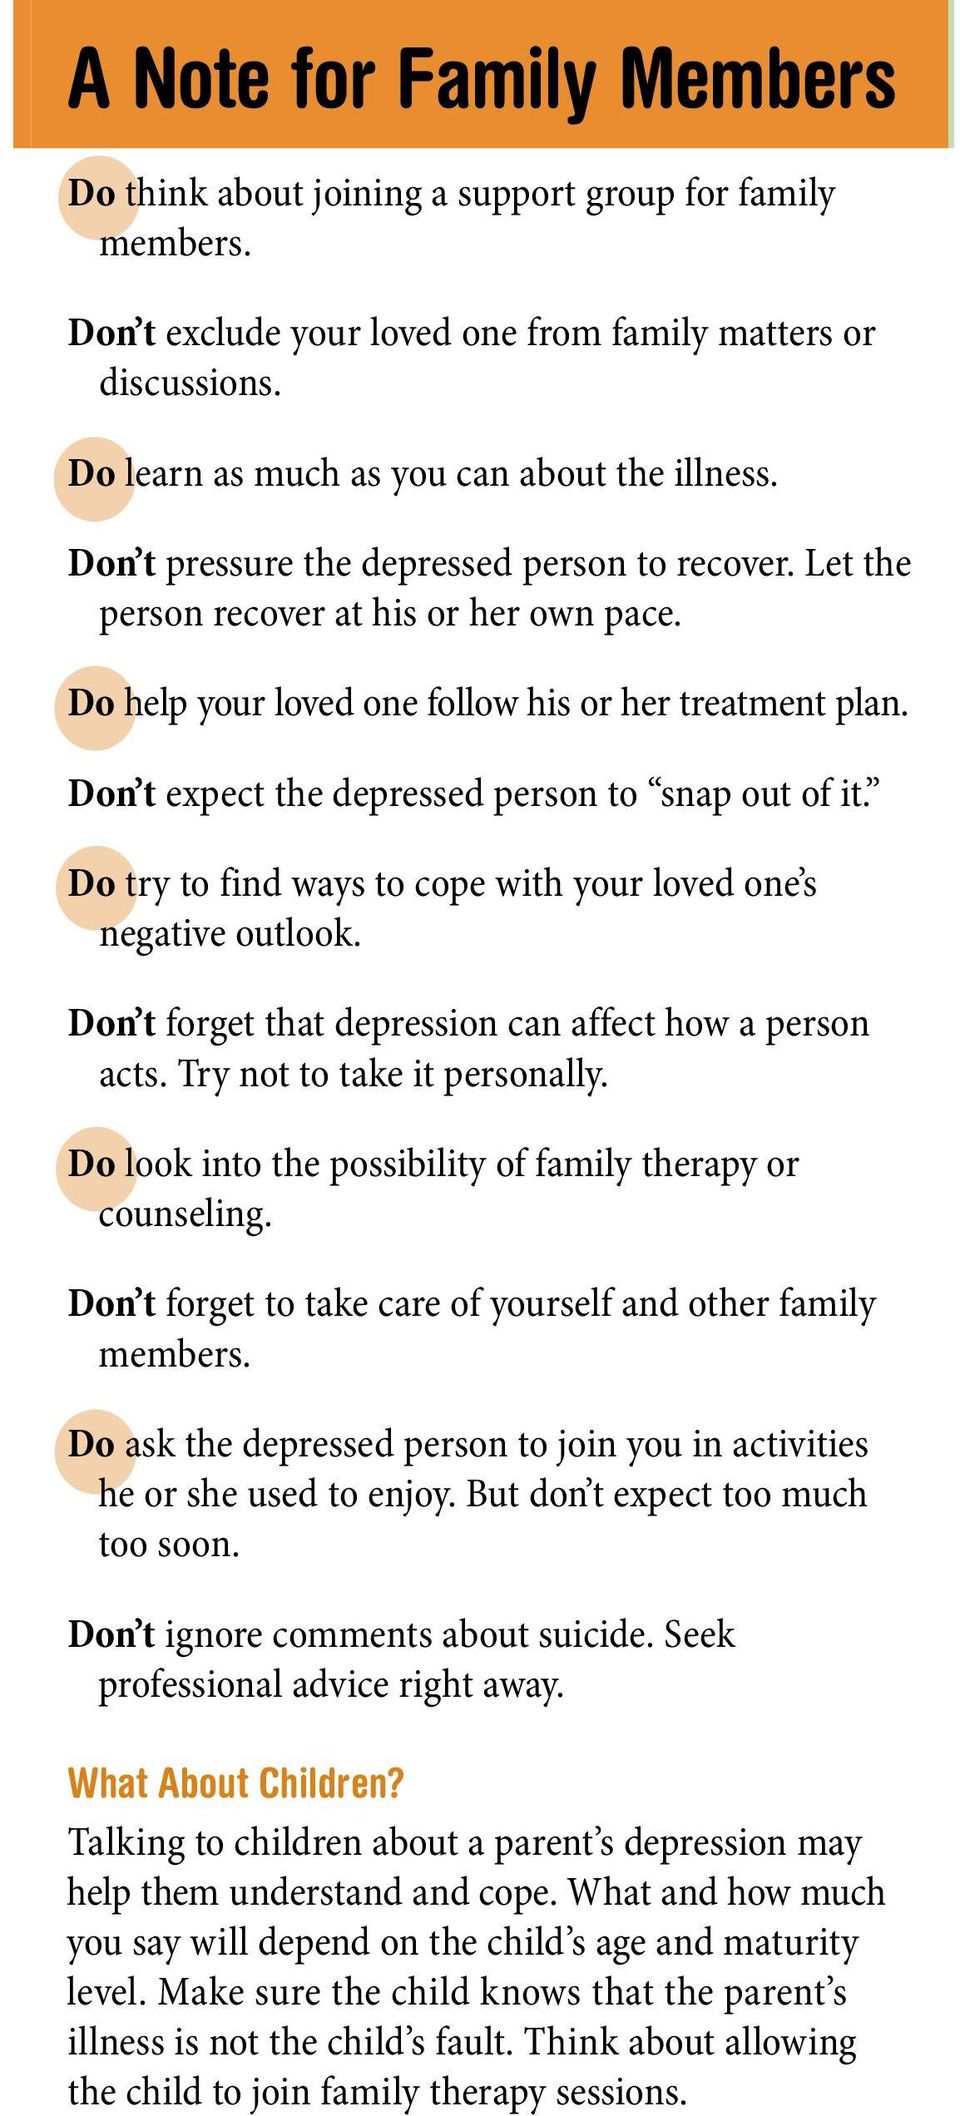 Don t expect the depressed person to snap out of it. Do try to find ways to cope with your loved one s negative outlook. Don t forget that depression can affect how a person acts.